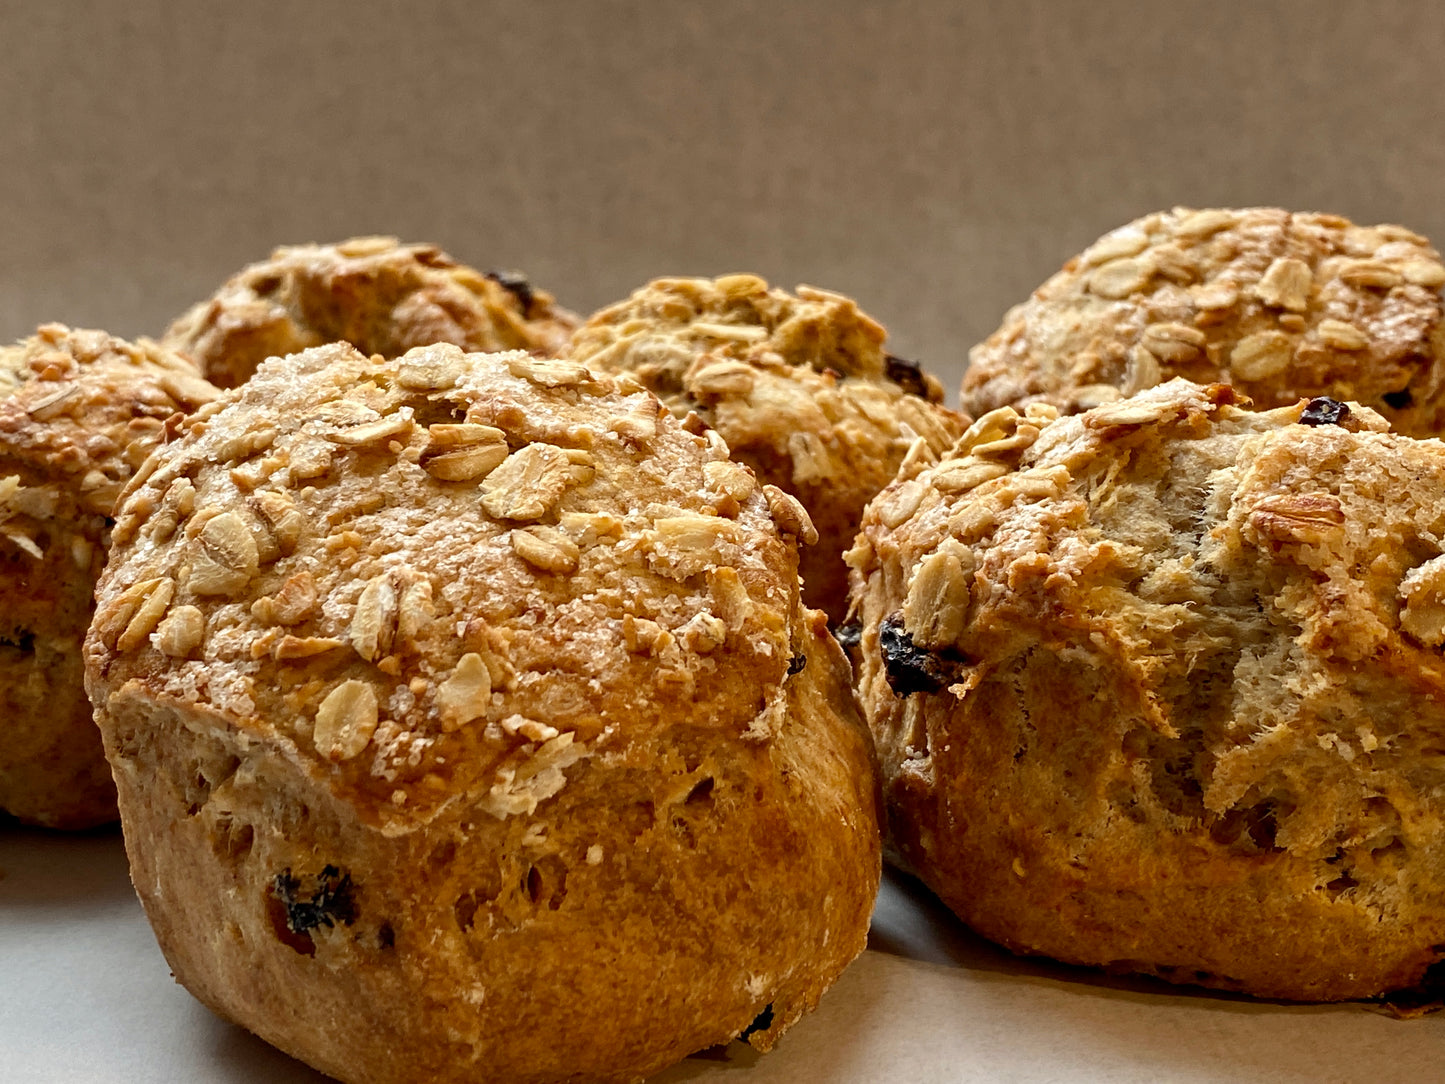 Scone, Oat-Currant